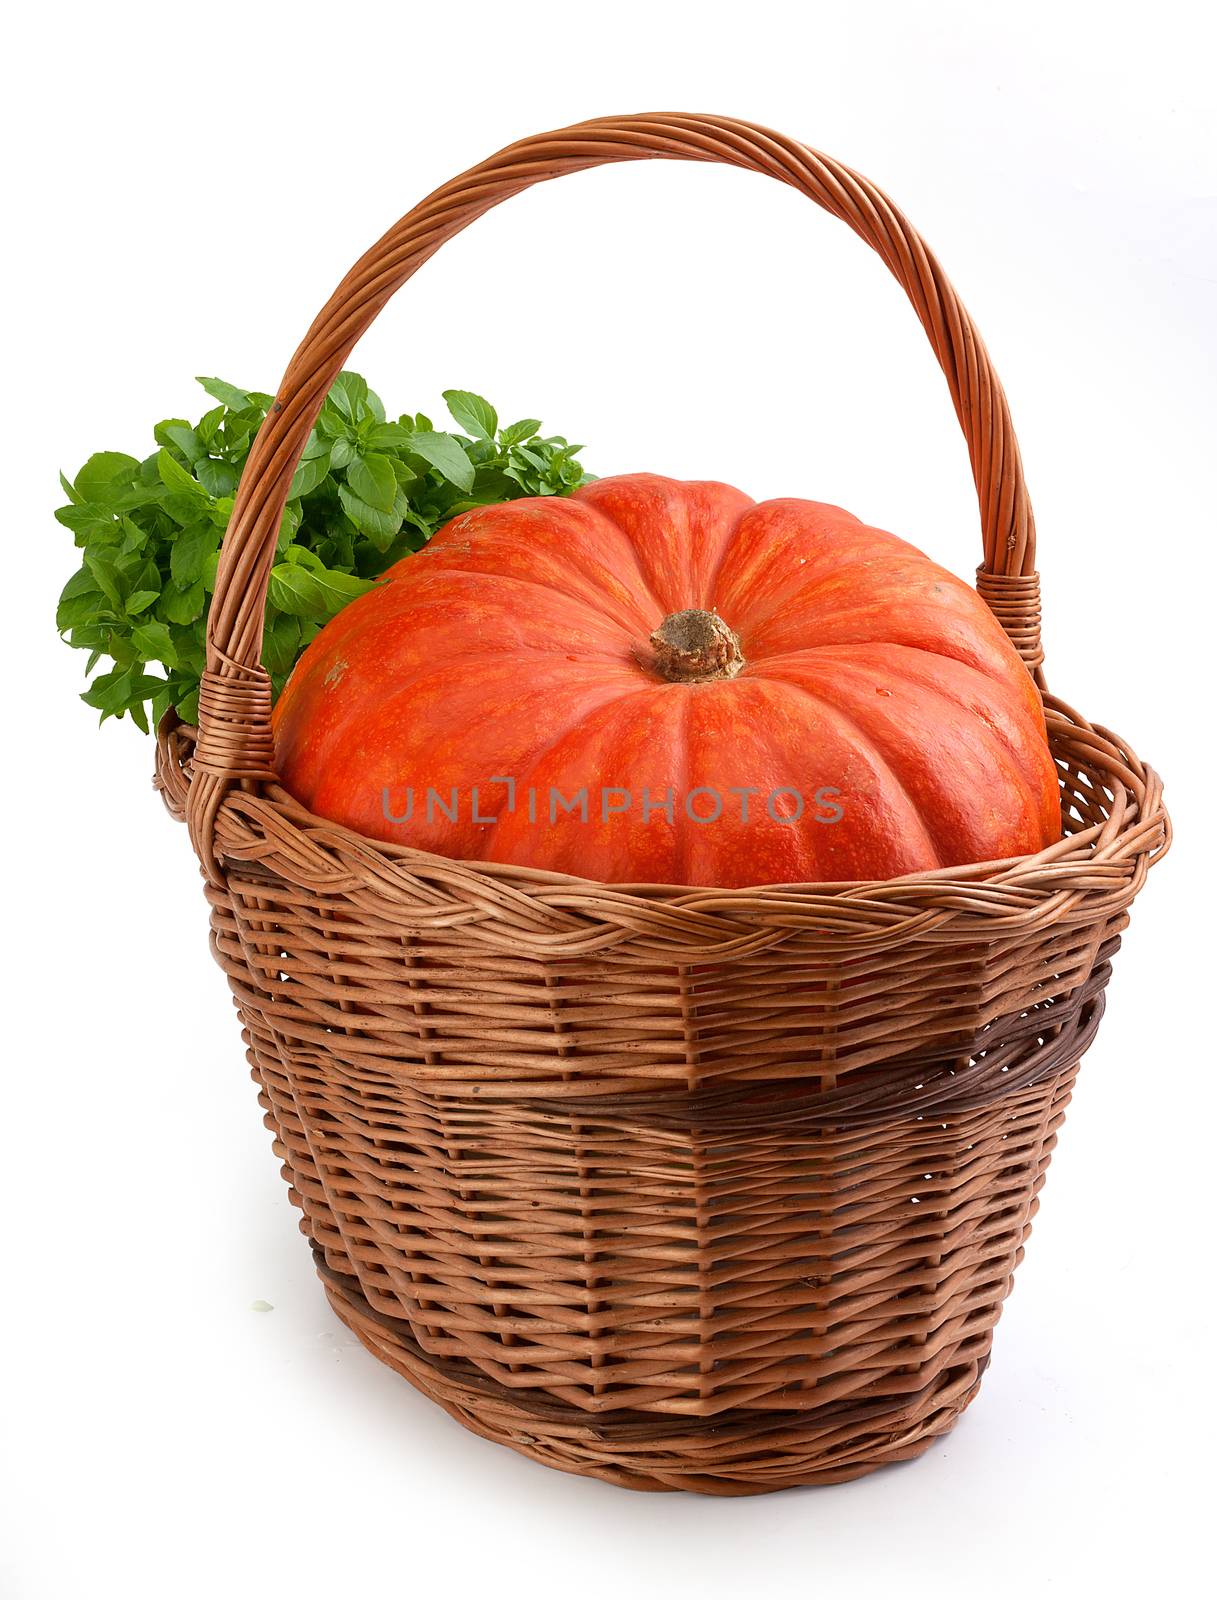 Isolated orange pumpkin with green basil in the brown basket